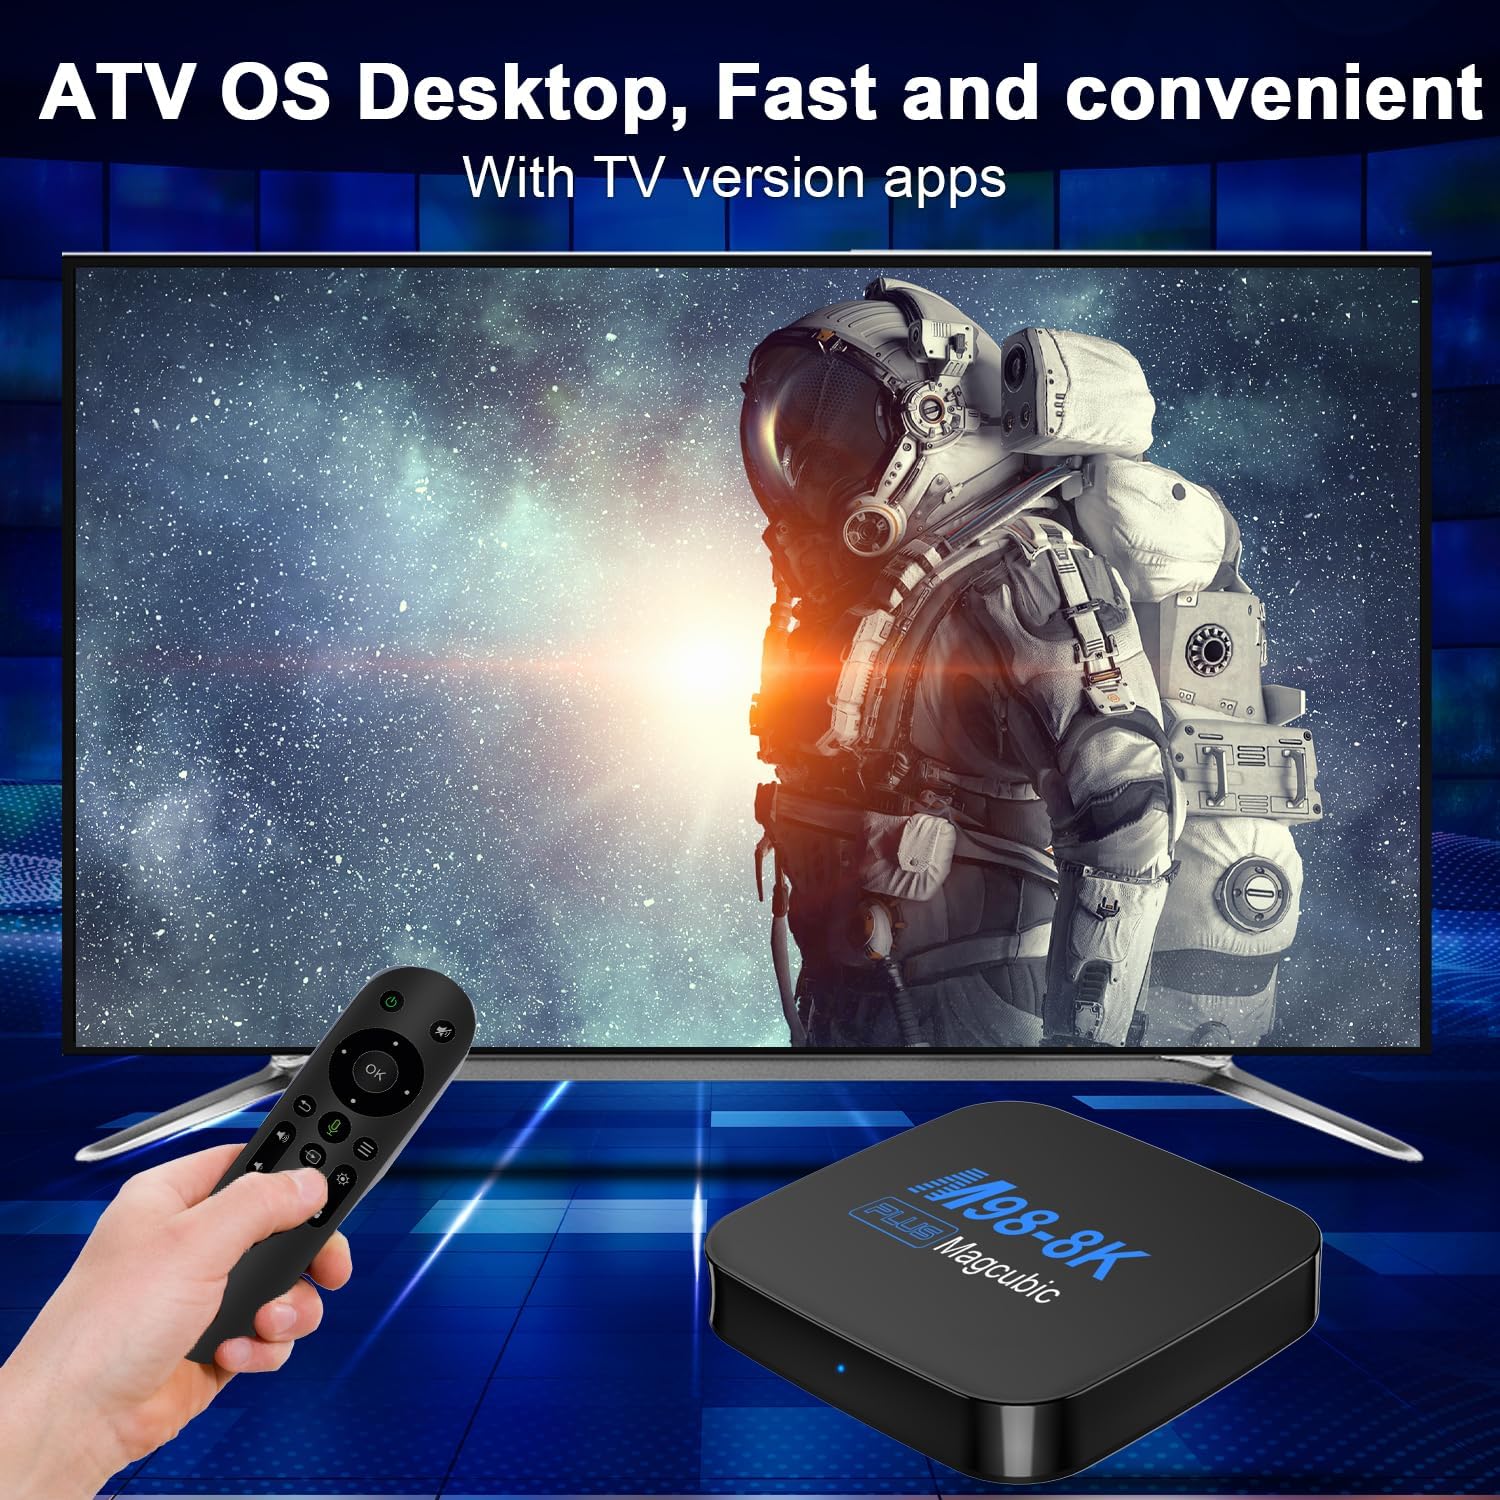 TV Box Android 13.0 TV Box, 2GB 16GB Allwinner H618 Cortex-A53 Android Box Support YouTube/Prime Video/Netflix 4K HDR H.265 HEVC 2.4G/5G WiFi BT5.0 with Remote Control